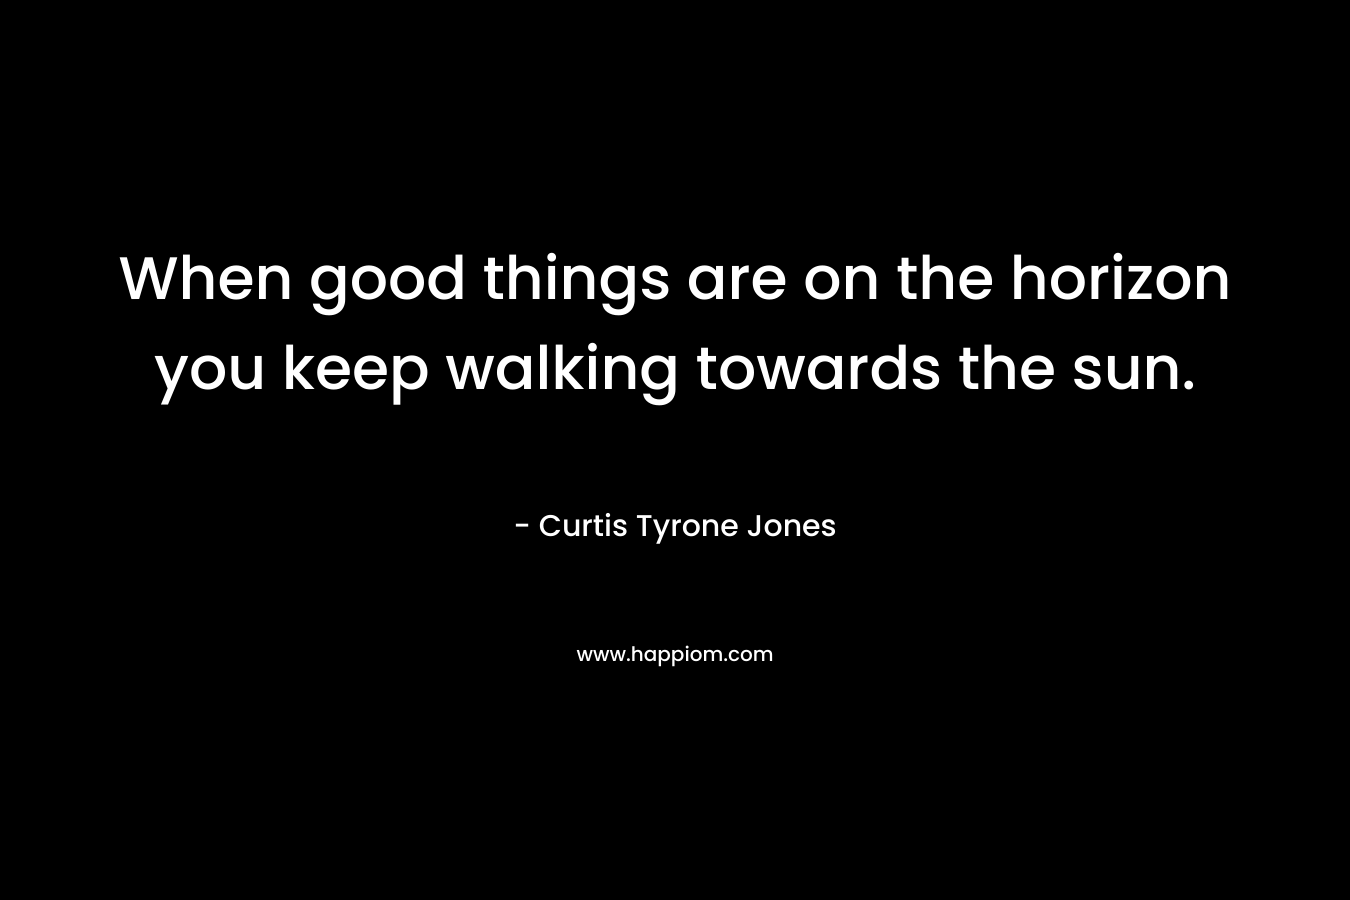 When good things are on the horizon you keep walking towards the sun.